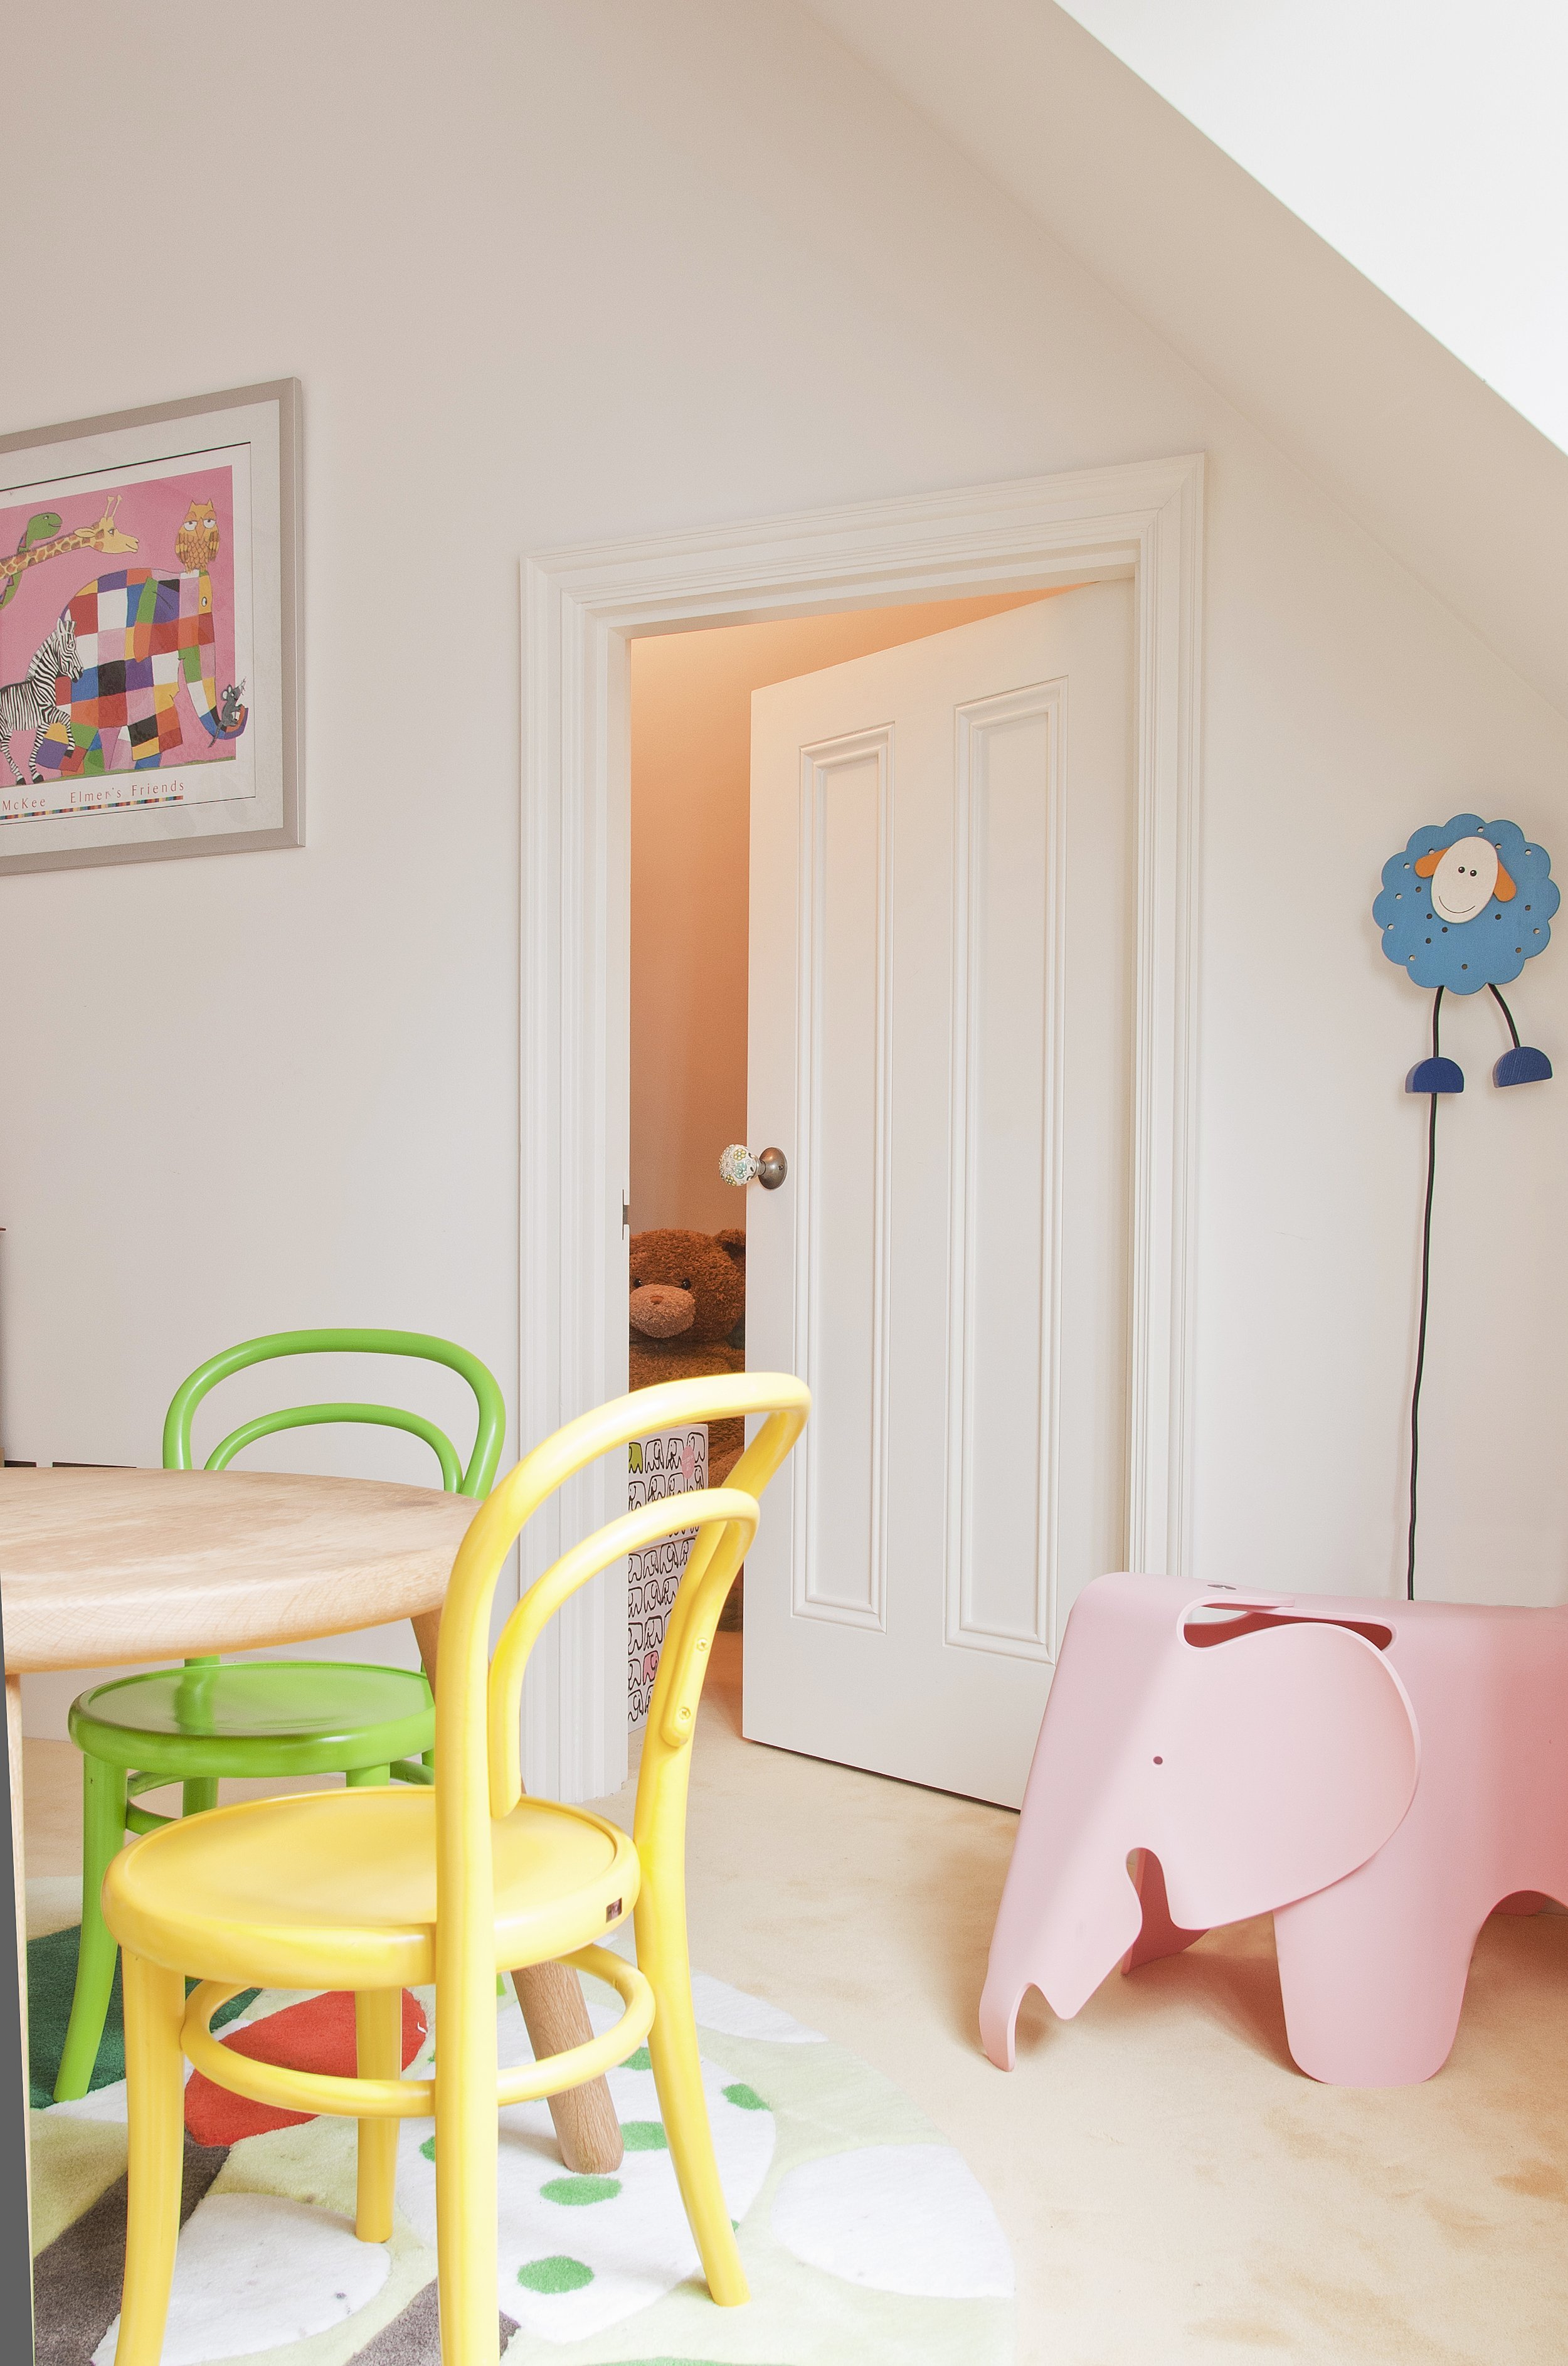 secret hideaways in this newly renovated childrens room